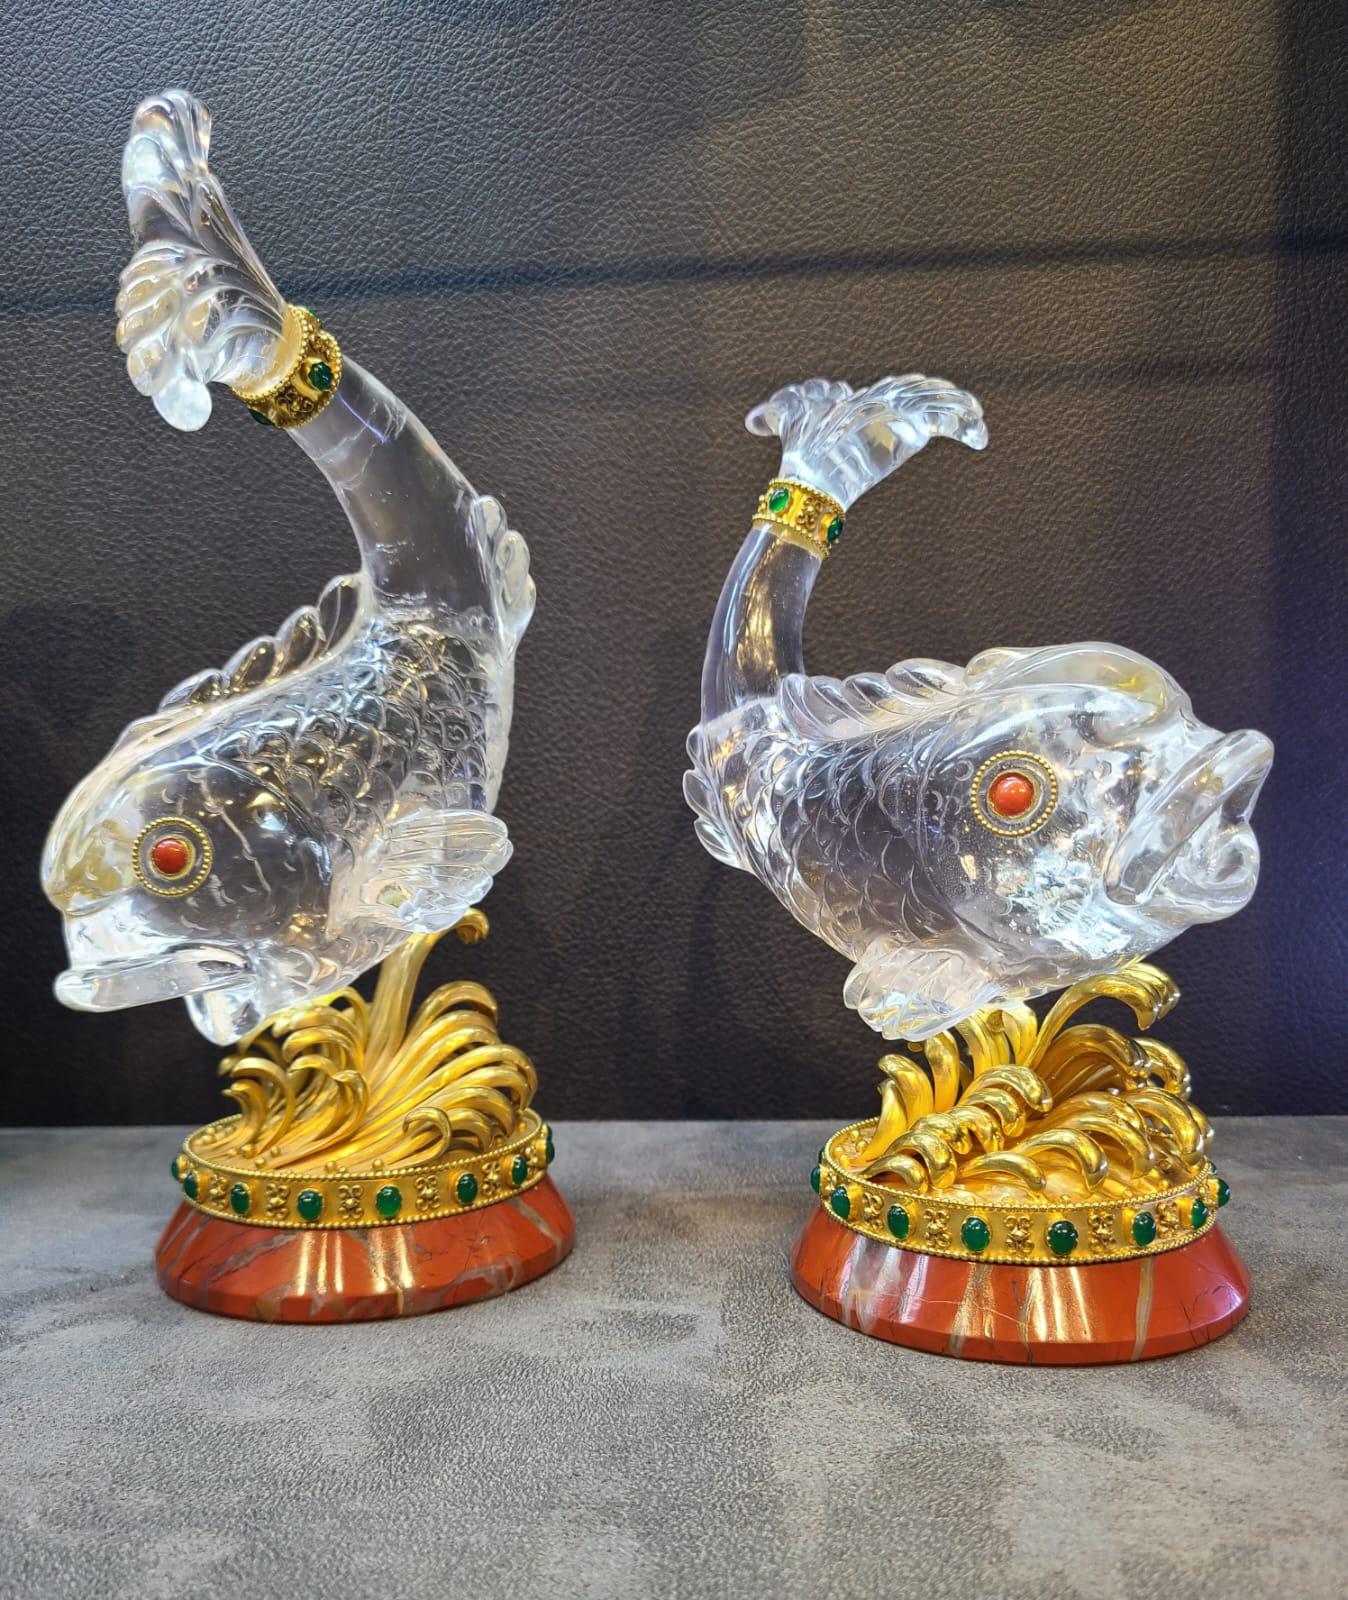 Carved Rock Crystal Fish Desk Objects by Boucheron A pair of rock crystal and gem set table ornaments, circa 1970
Designed as a rock crystal carp upon a jasper plinth with cabochon chrysoprase and coral
Signed Boucheron.

Measurements: 